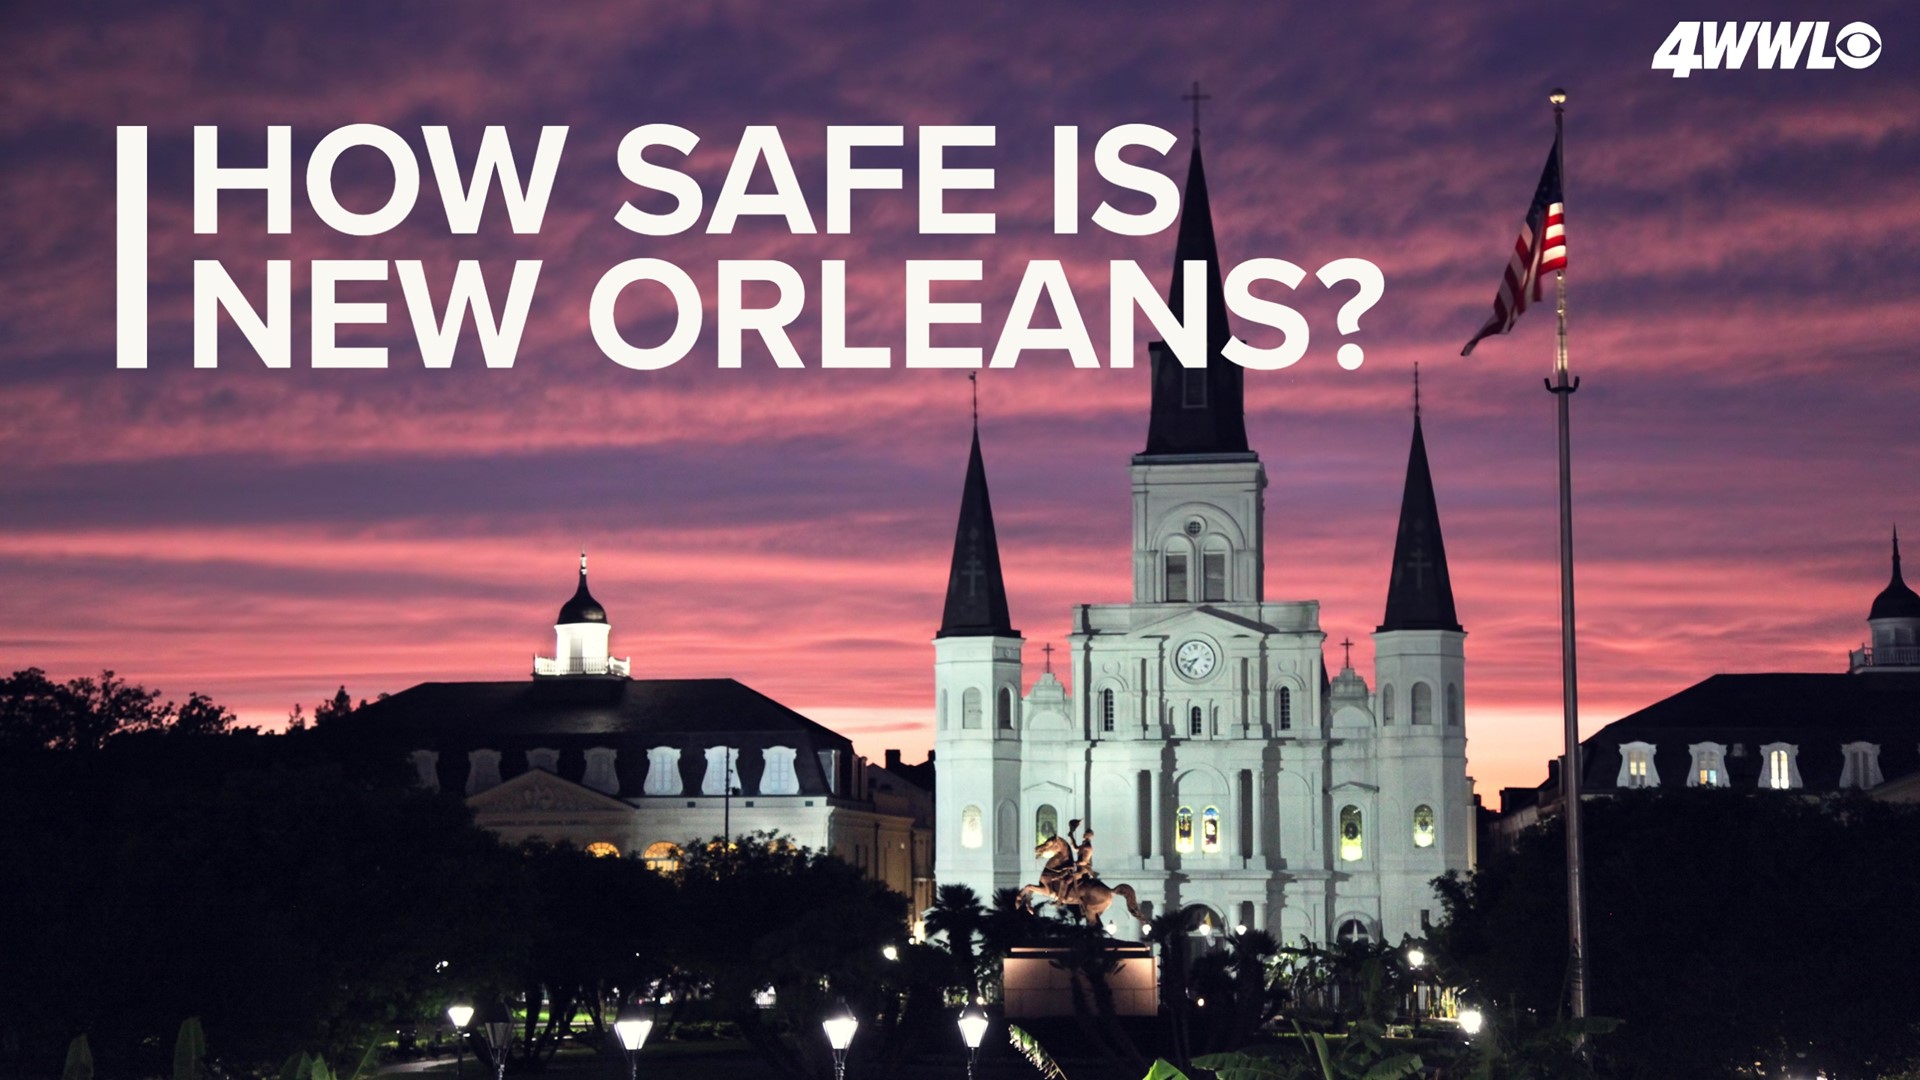 Only 33% of 800 respondents said they were satisfied with the NOPD in a new crime report.